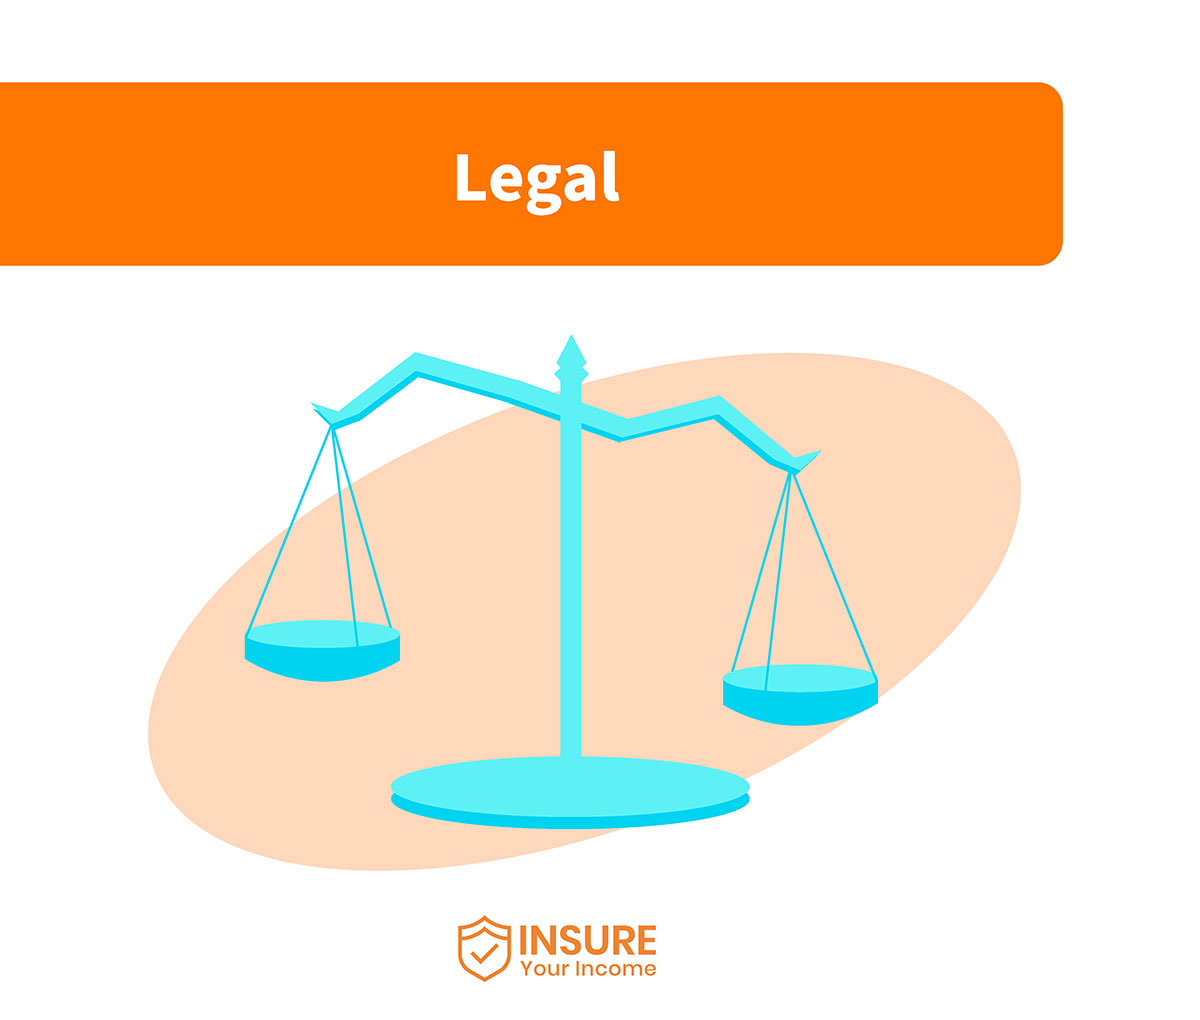 Insure your income for law